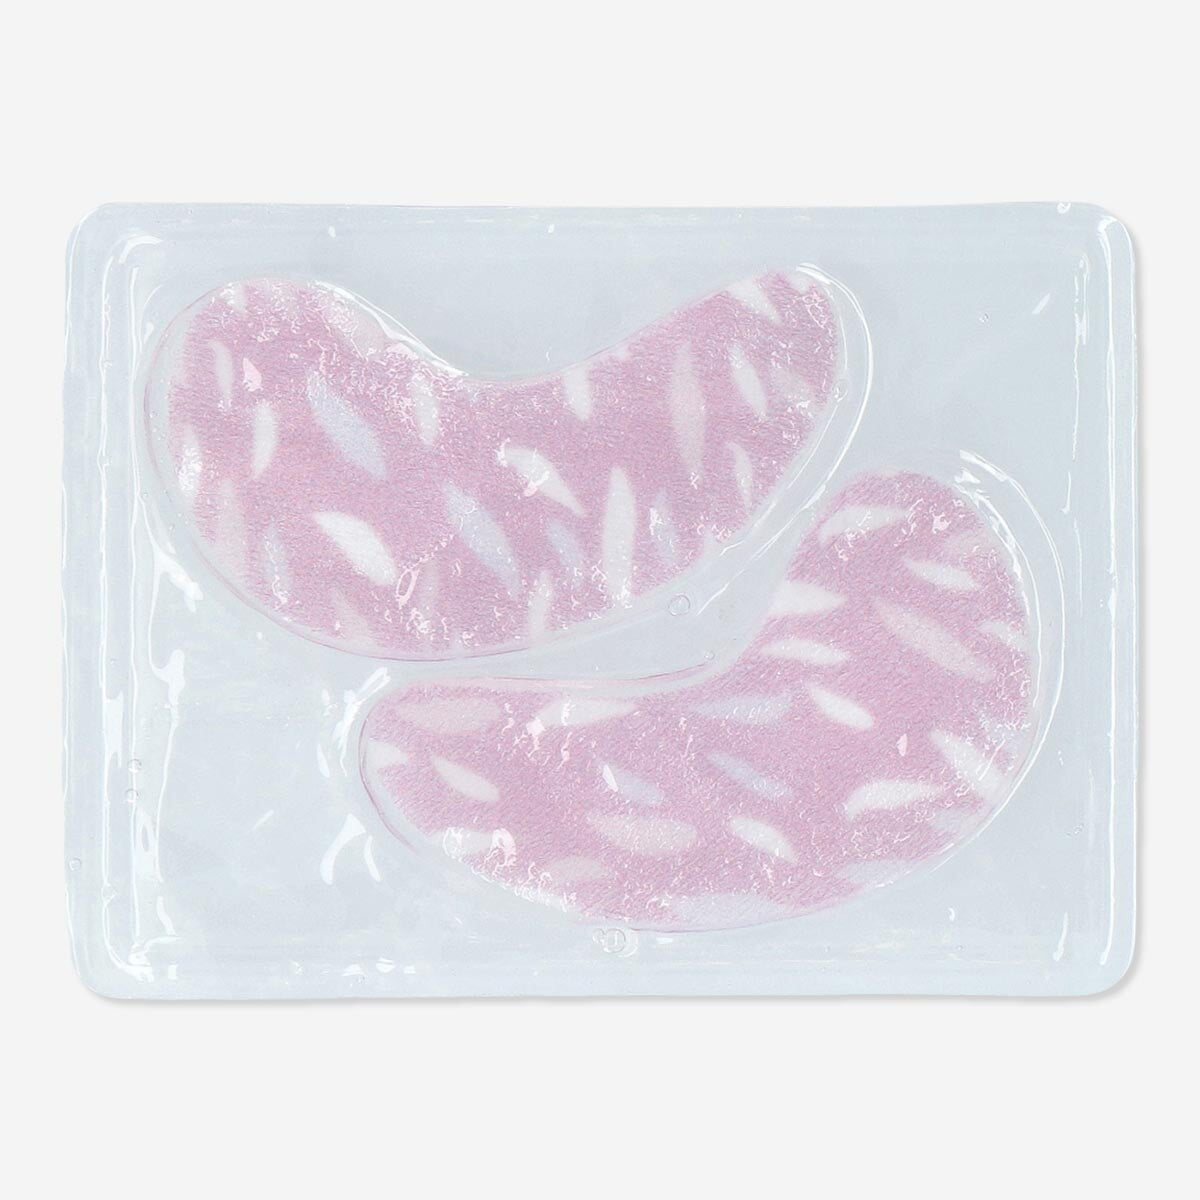 Hydrogel patches. Rose fragrance Personal care Flying Tiger Copenhagen 